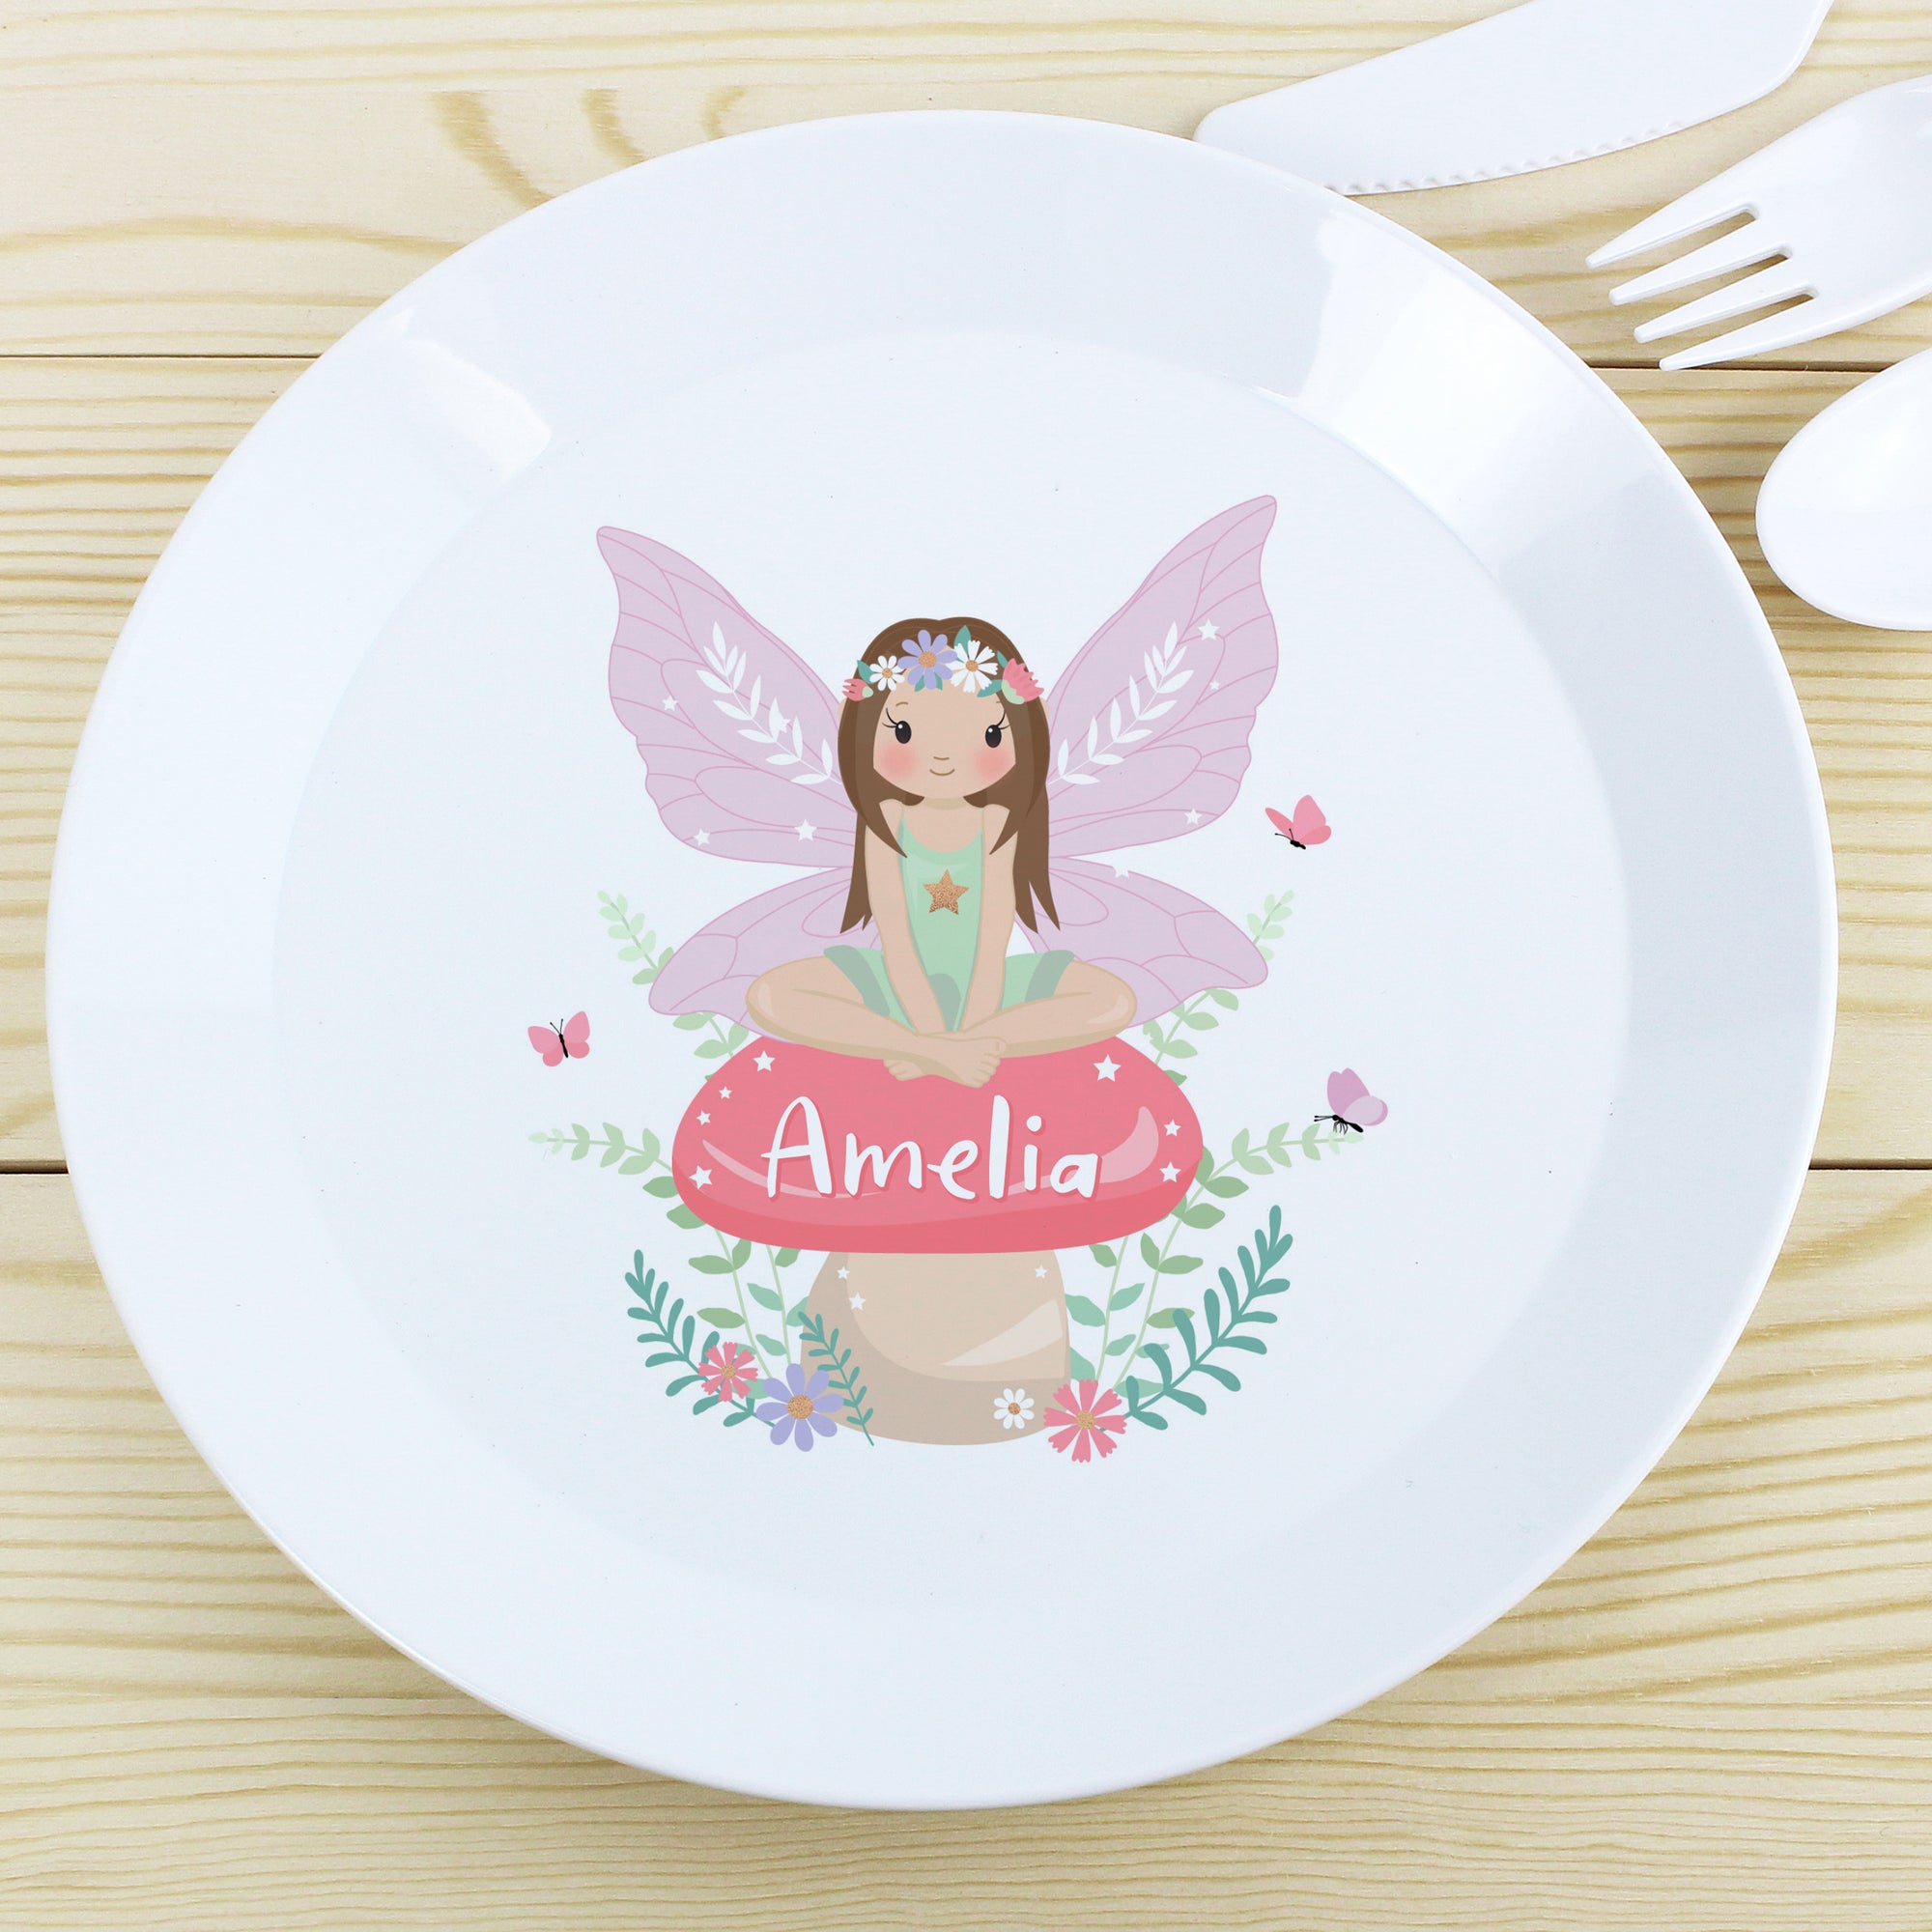 Fairy Plate, Bowl, Cup & Cutlery Set